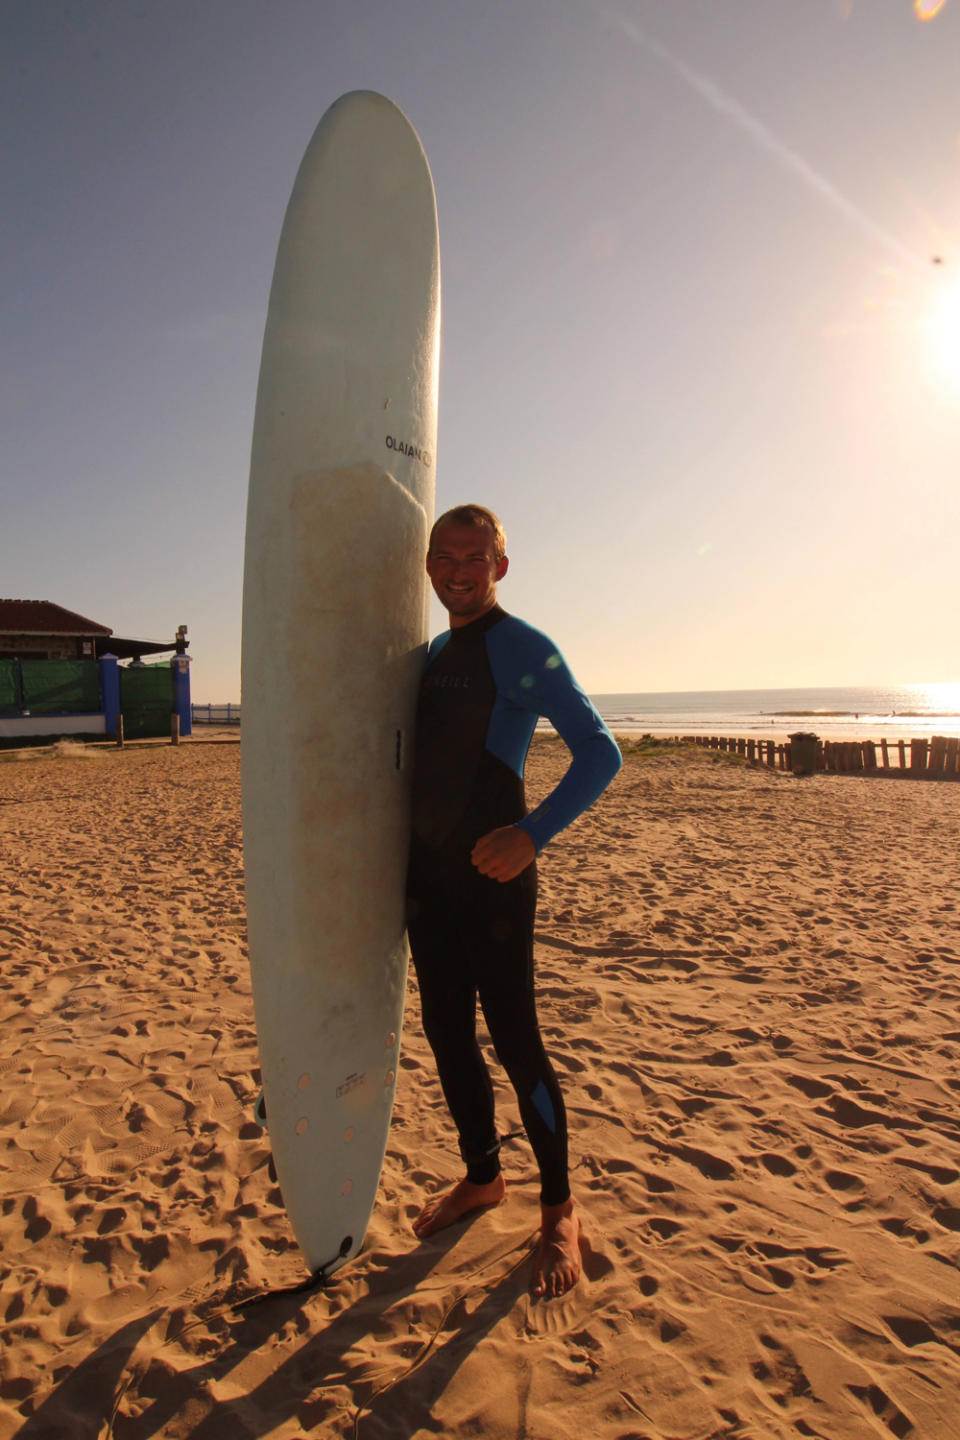 Kieran has learnt to surf since they started travelling in their van (Collect/PA Real Life)